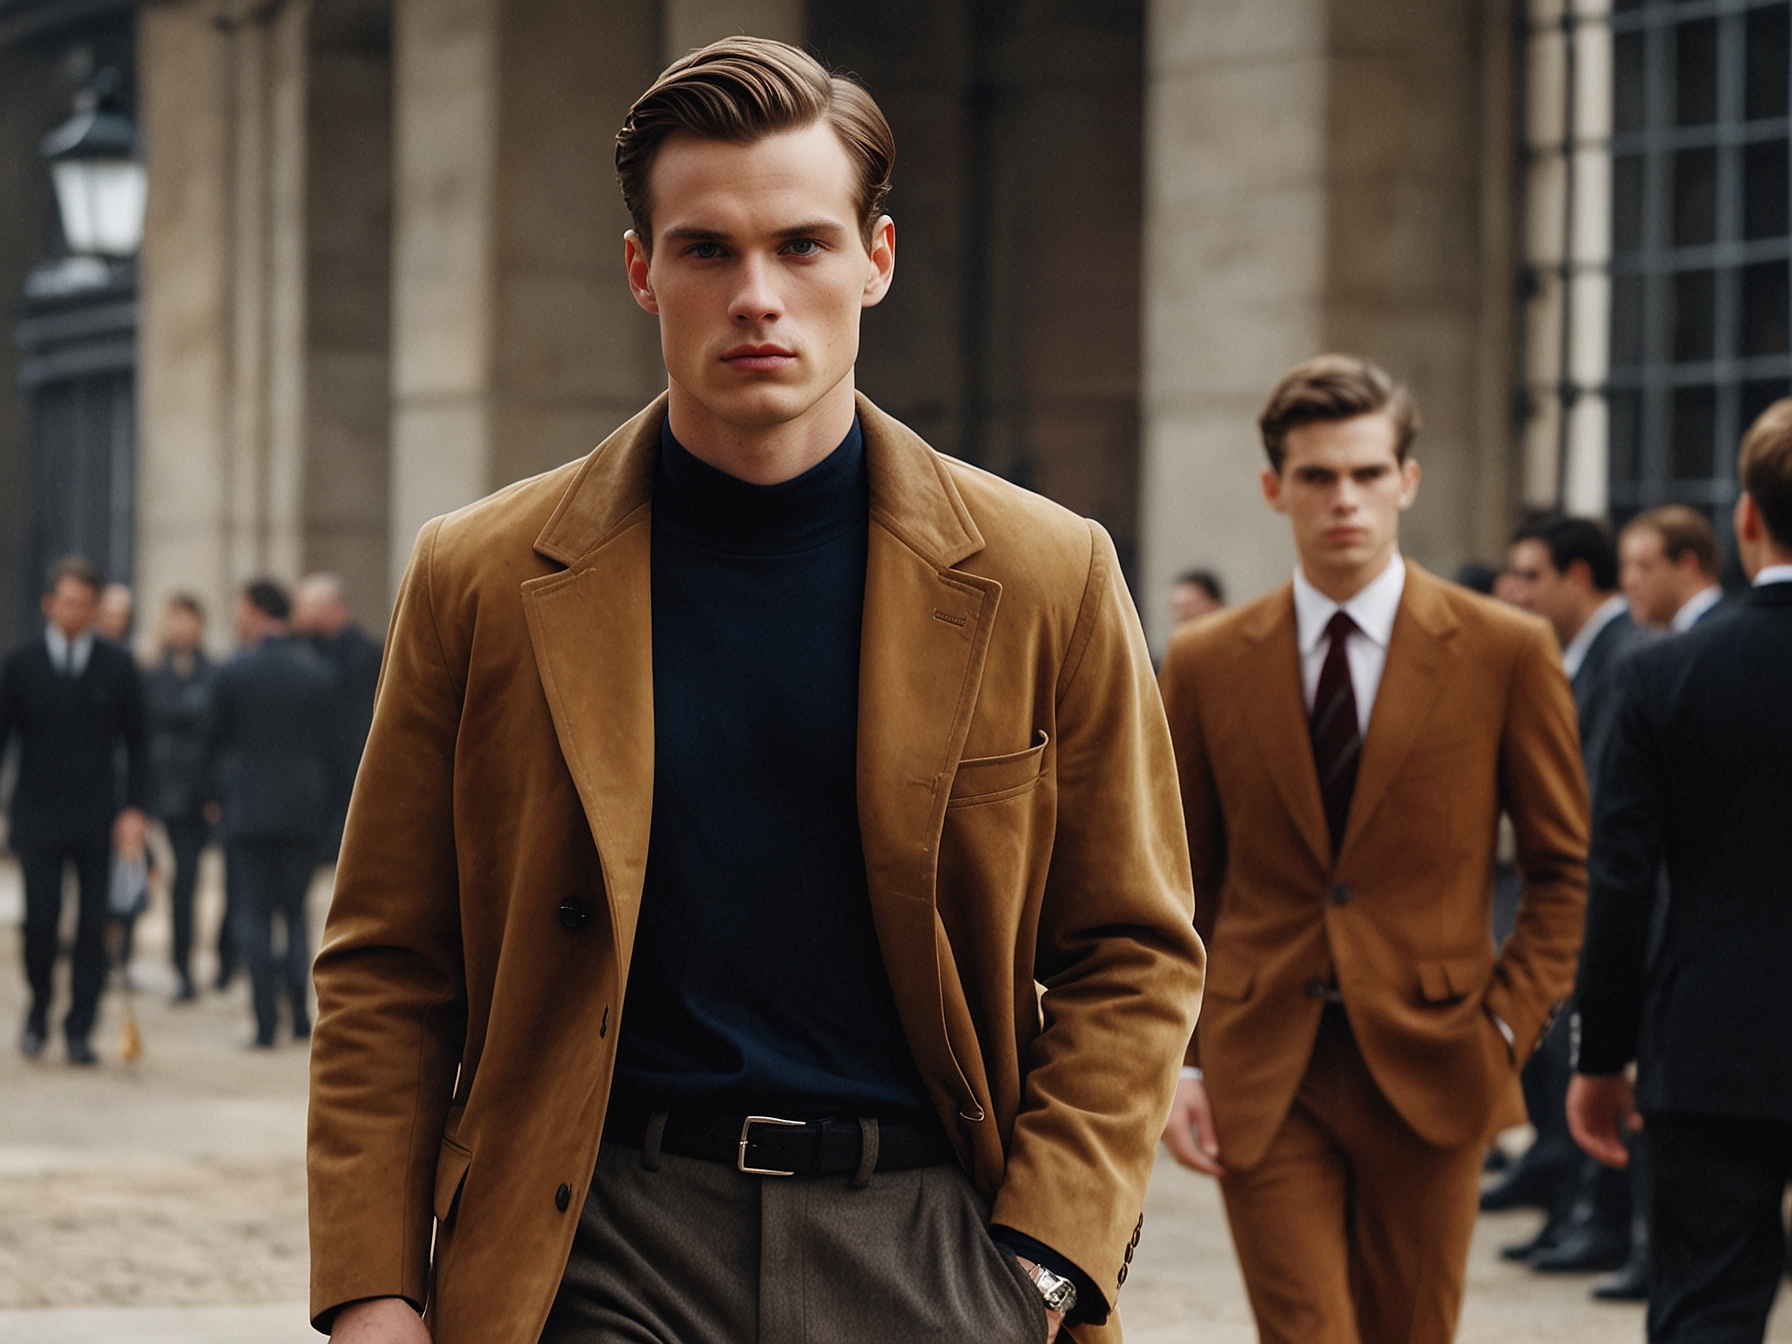 Models walking the runway in Dunhill's classic and bold designs, featuring suede outerwear, fitted trousers, and leather accessories. The collection highlighted timeless British craftsmanship and elegance.